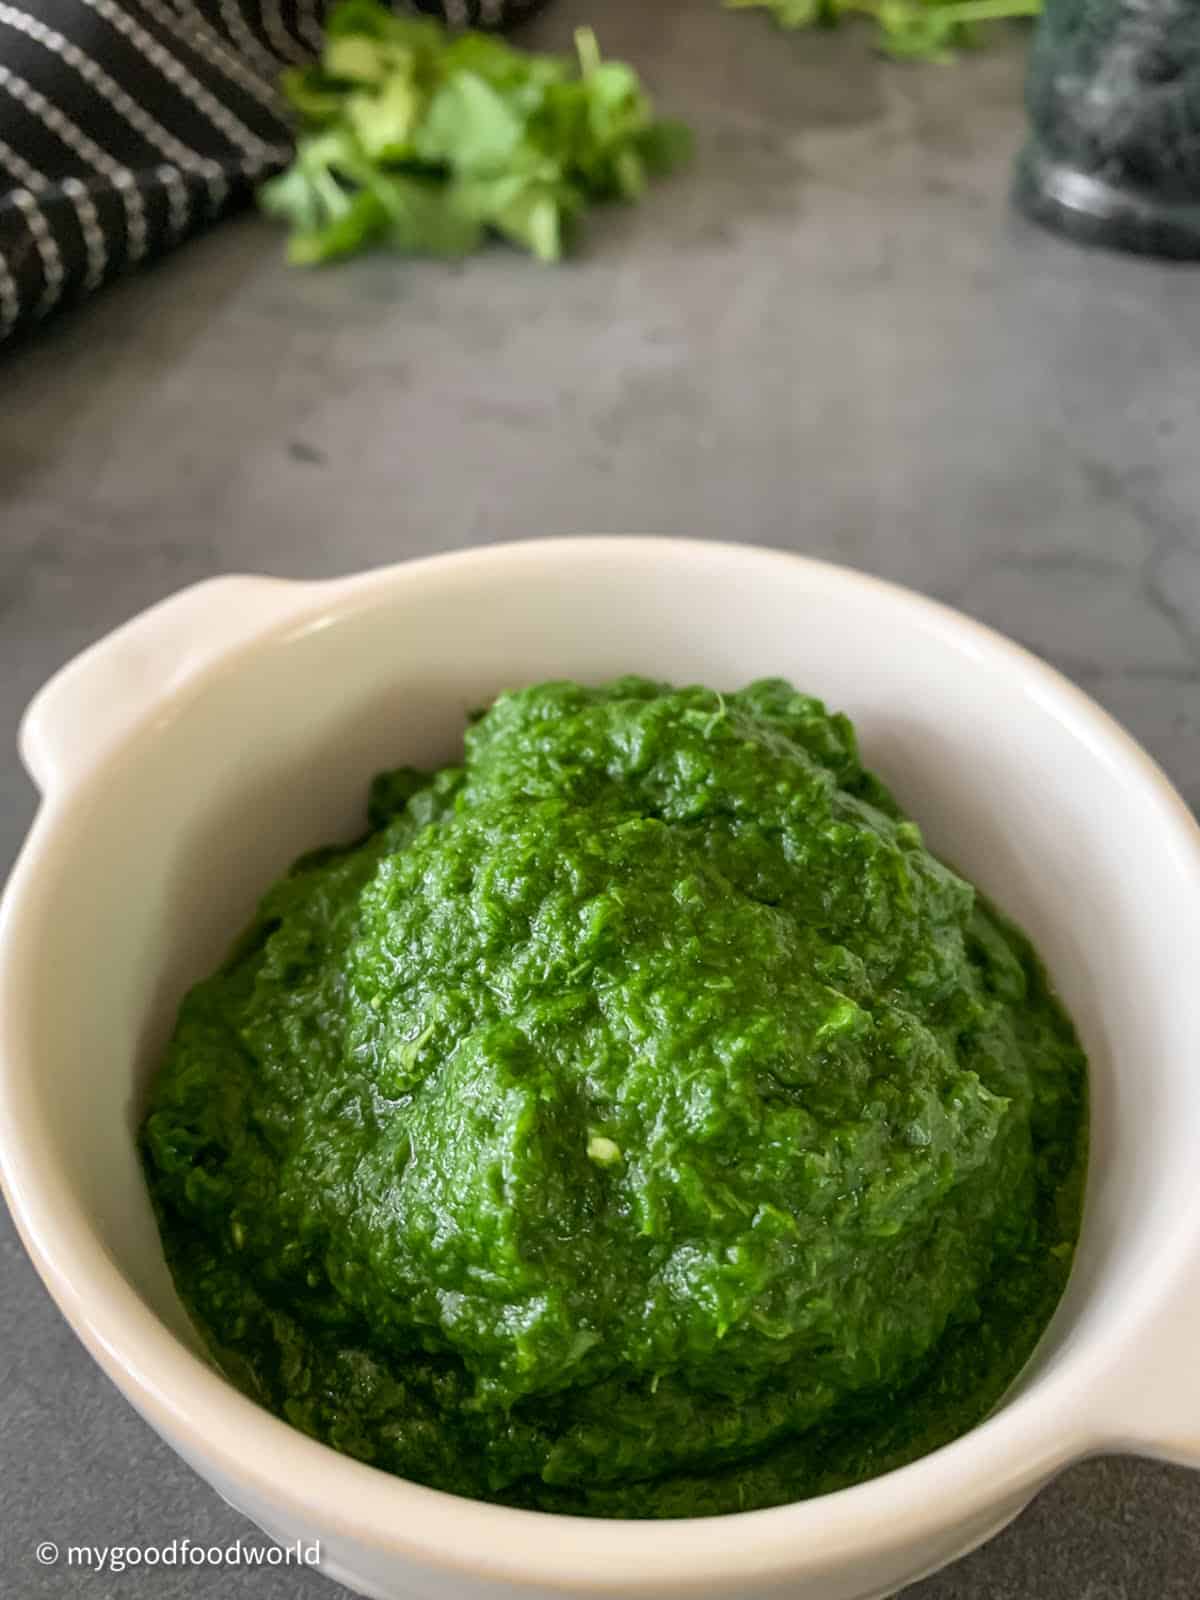 Green chutney is placed in a white bowl. Also seen are some fresh coriander leaves, a pestle and a cloth napkin.